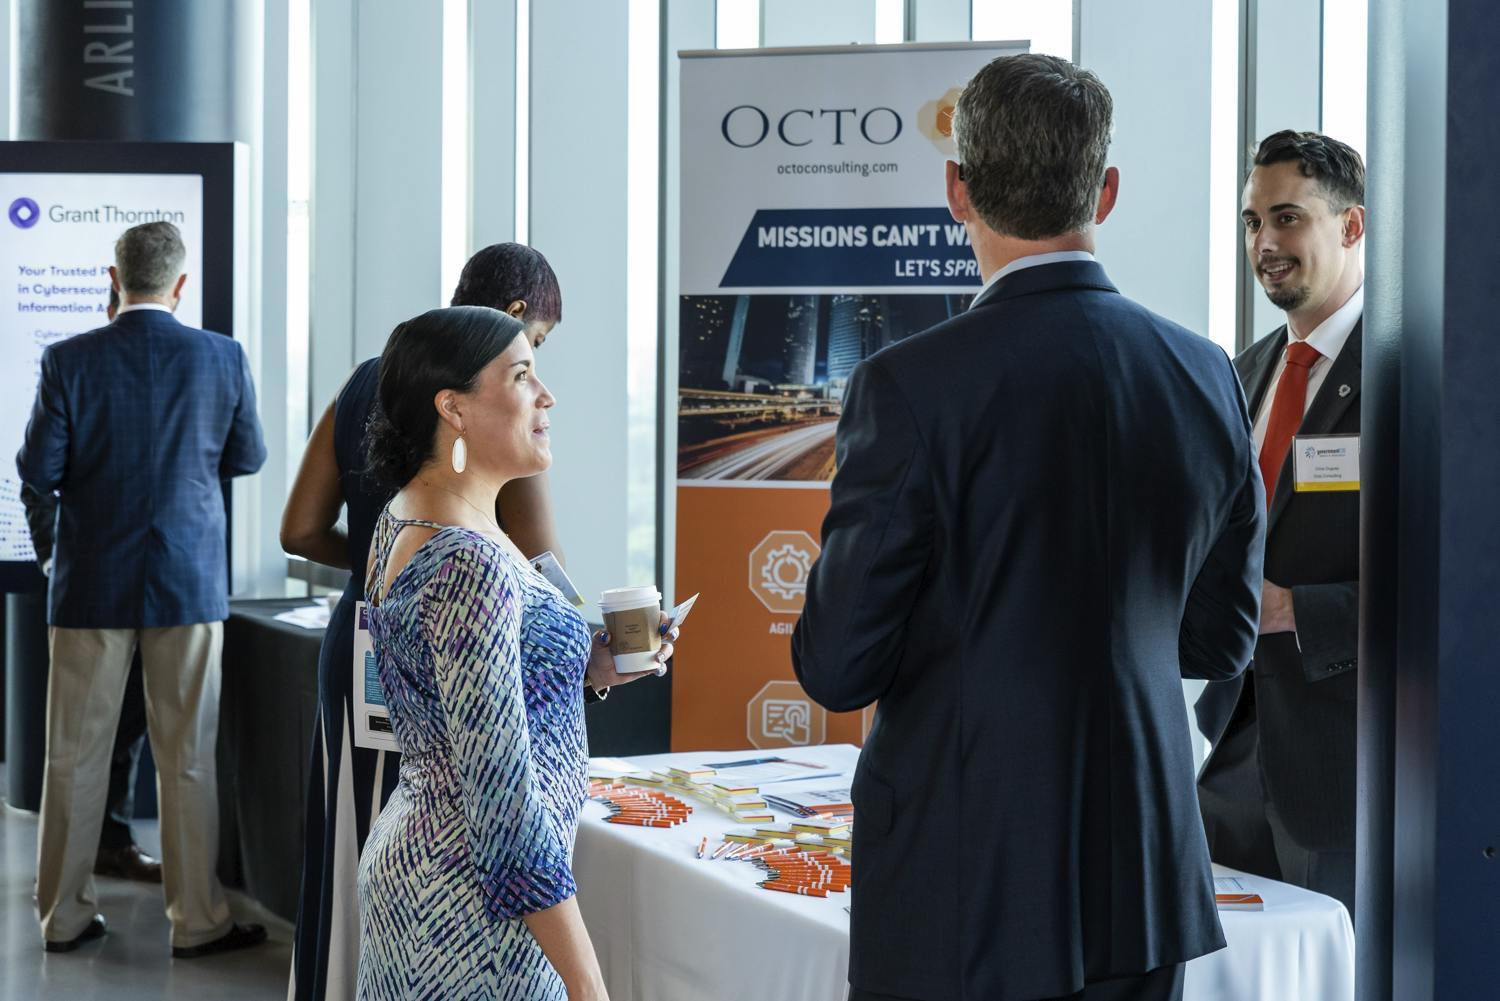 Octo Consulting booth at the State of Cyber CXO Tech Forum